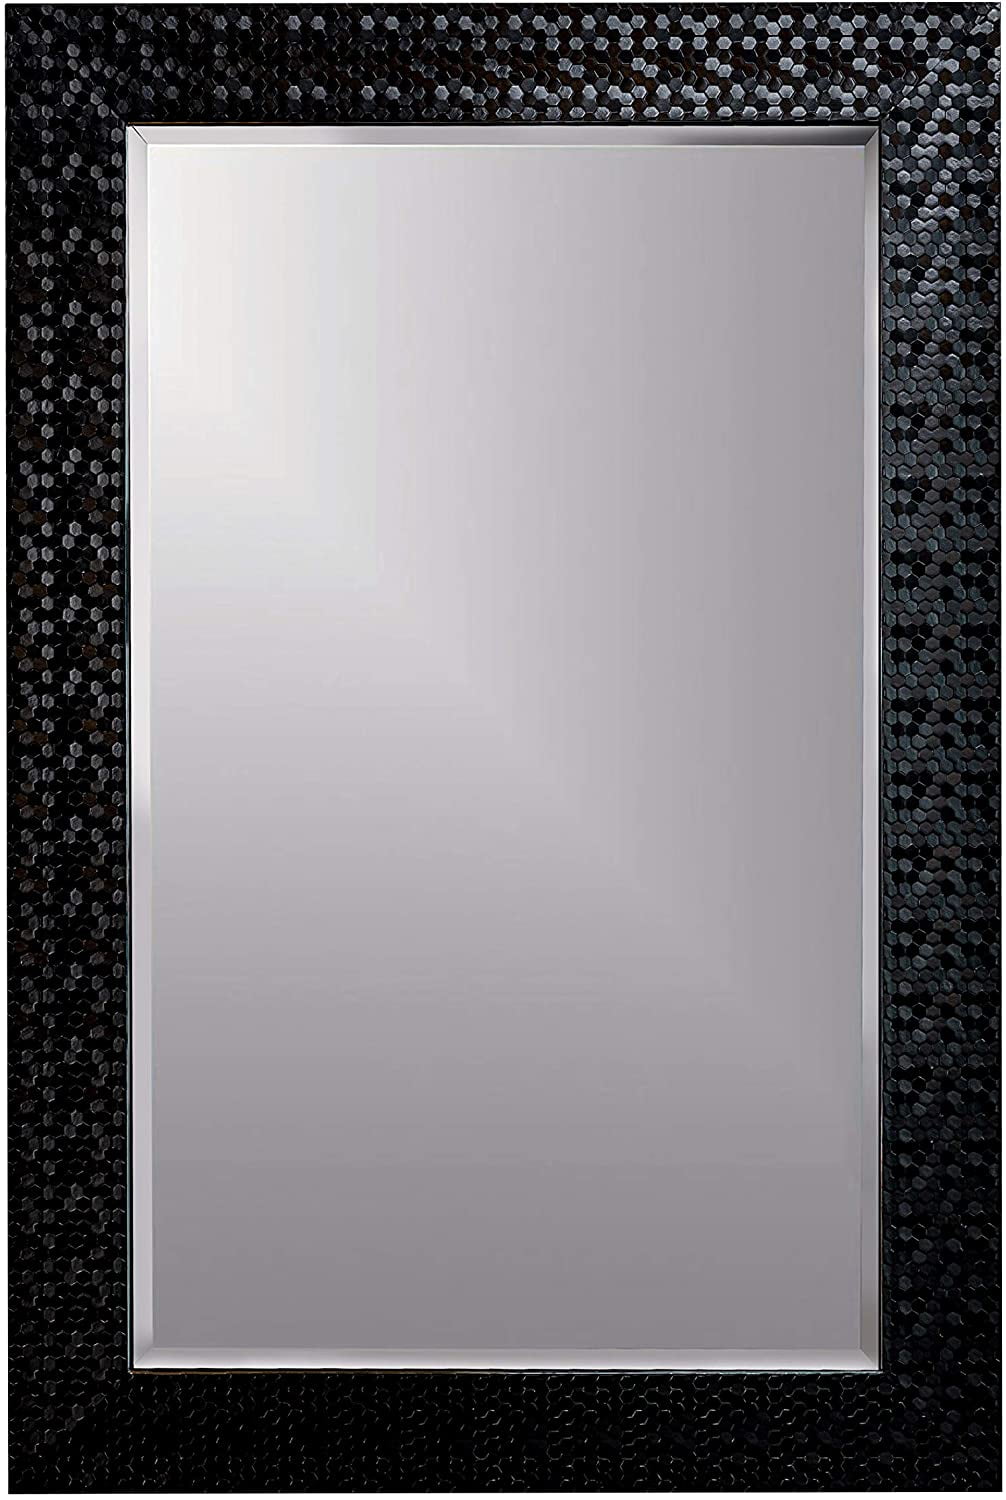 Champagne Marabell Rectangle Mosaic Framed Beveled Wall Mirror 21x27 inches